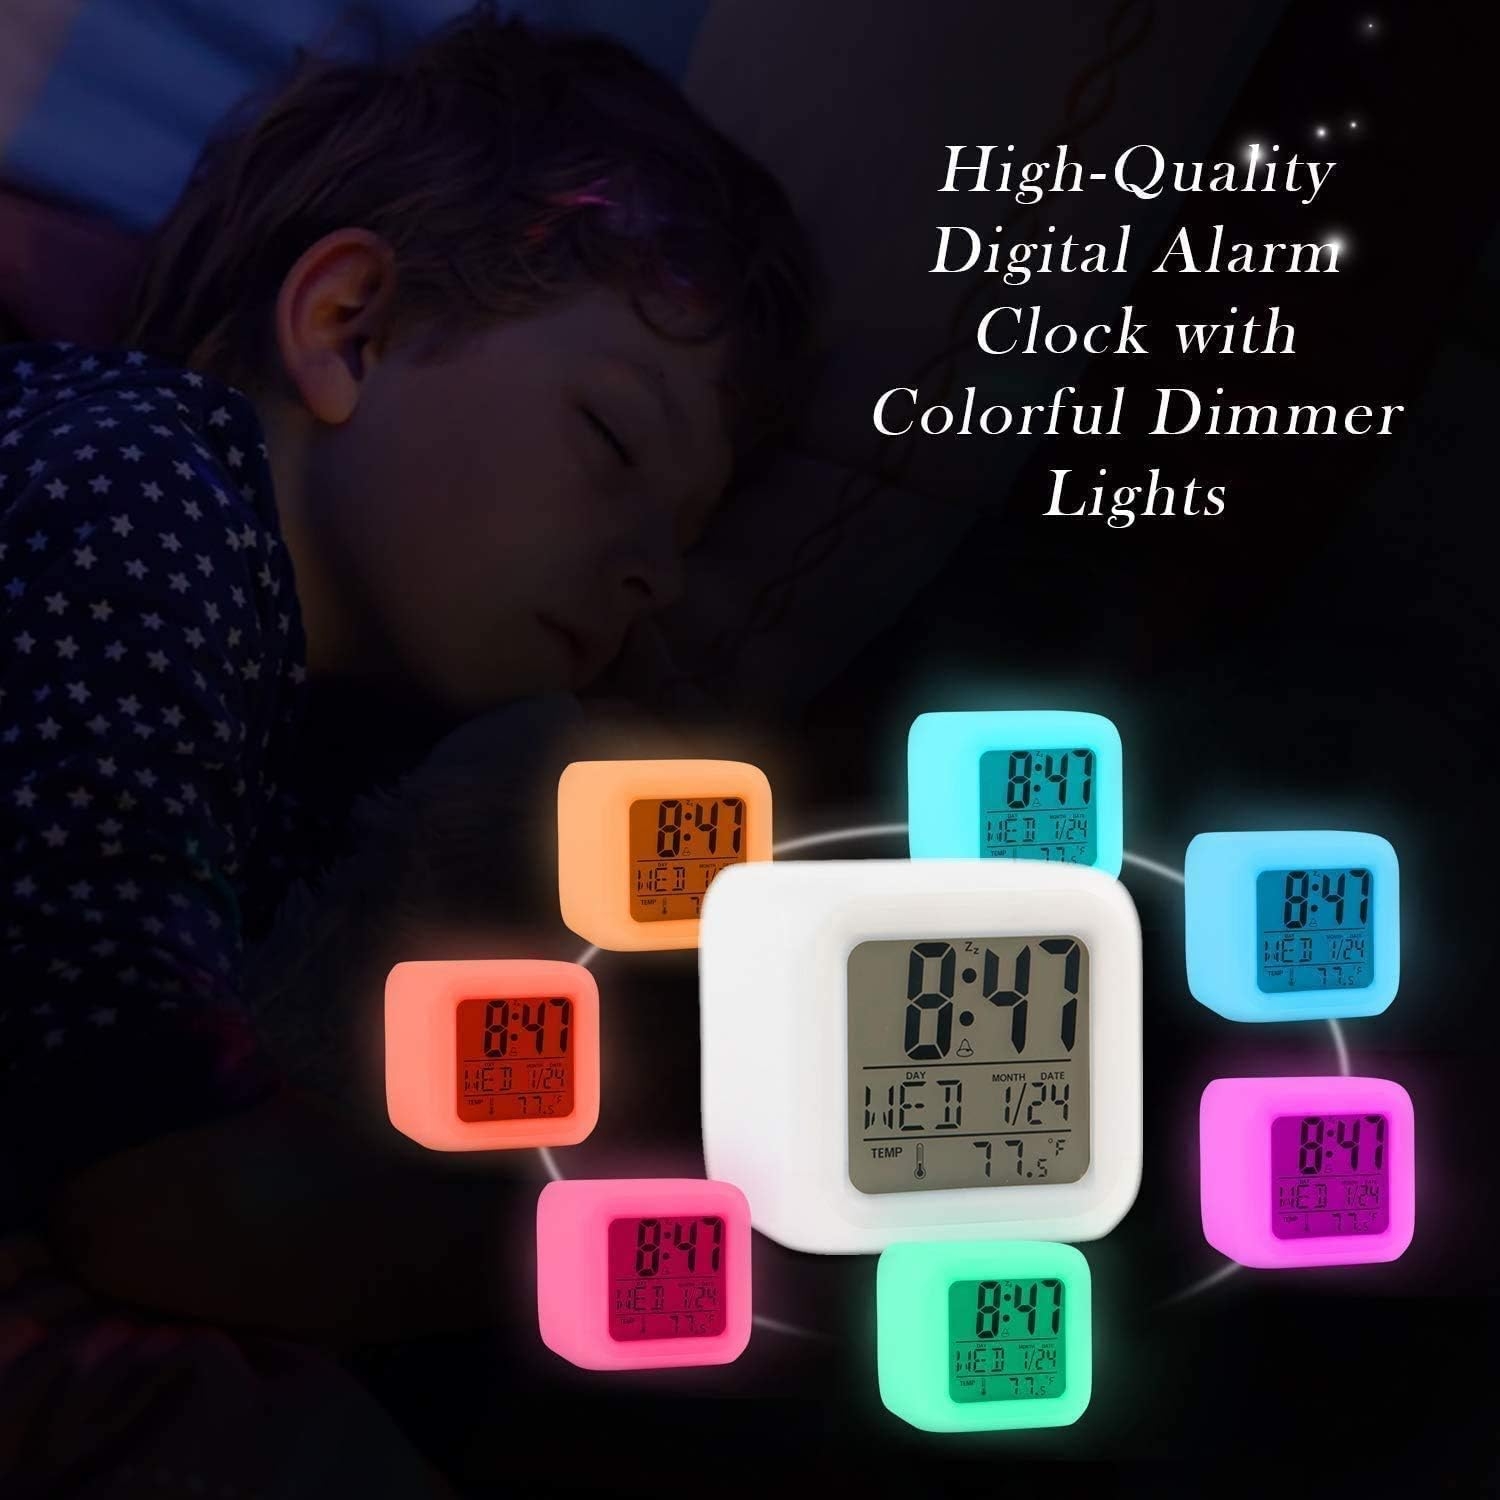 Alarm Clock Kids Wake Up Easy Setting Digital Travel for Boys Girls, Large Display Time/Date/Alarm with Snooze, Bedside Clock Handheld Sized, LED Night Light Clock - Best Gift for Kids